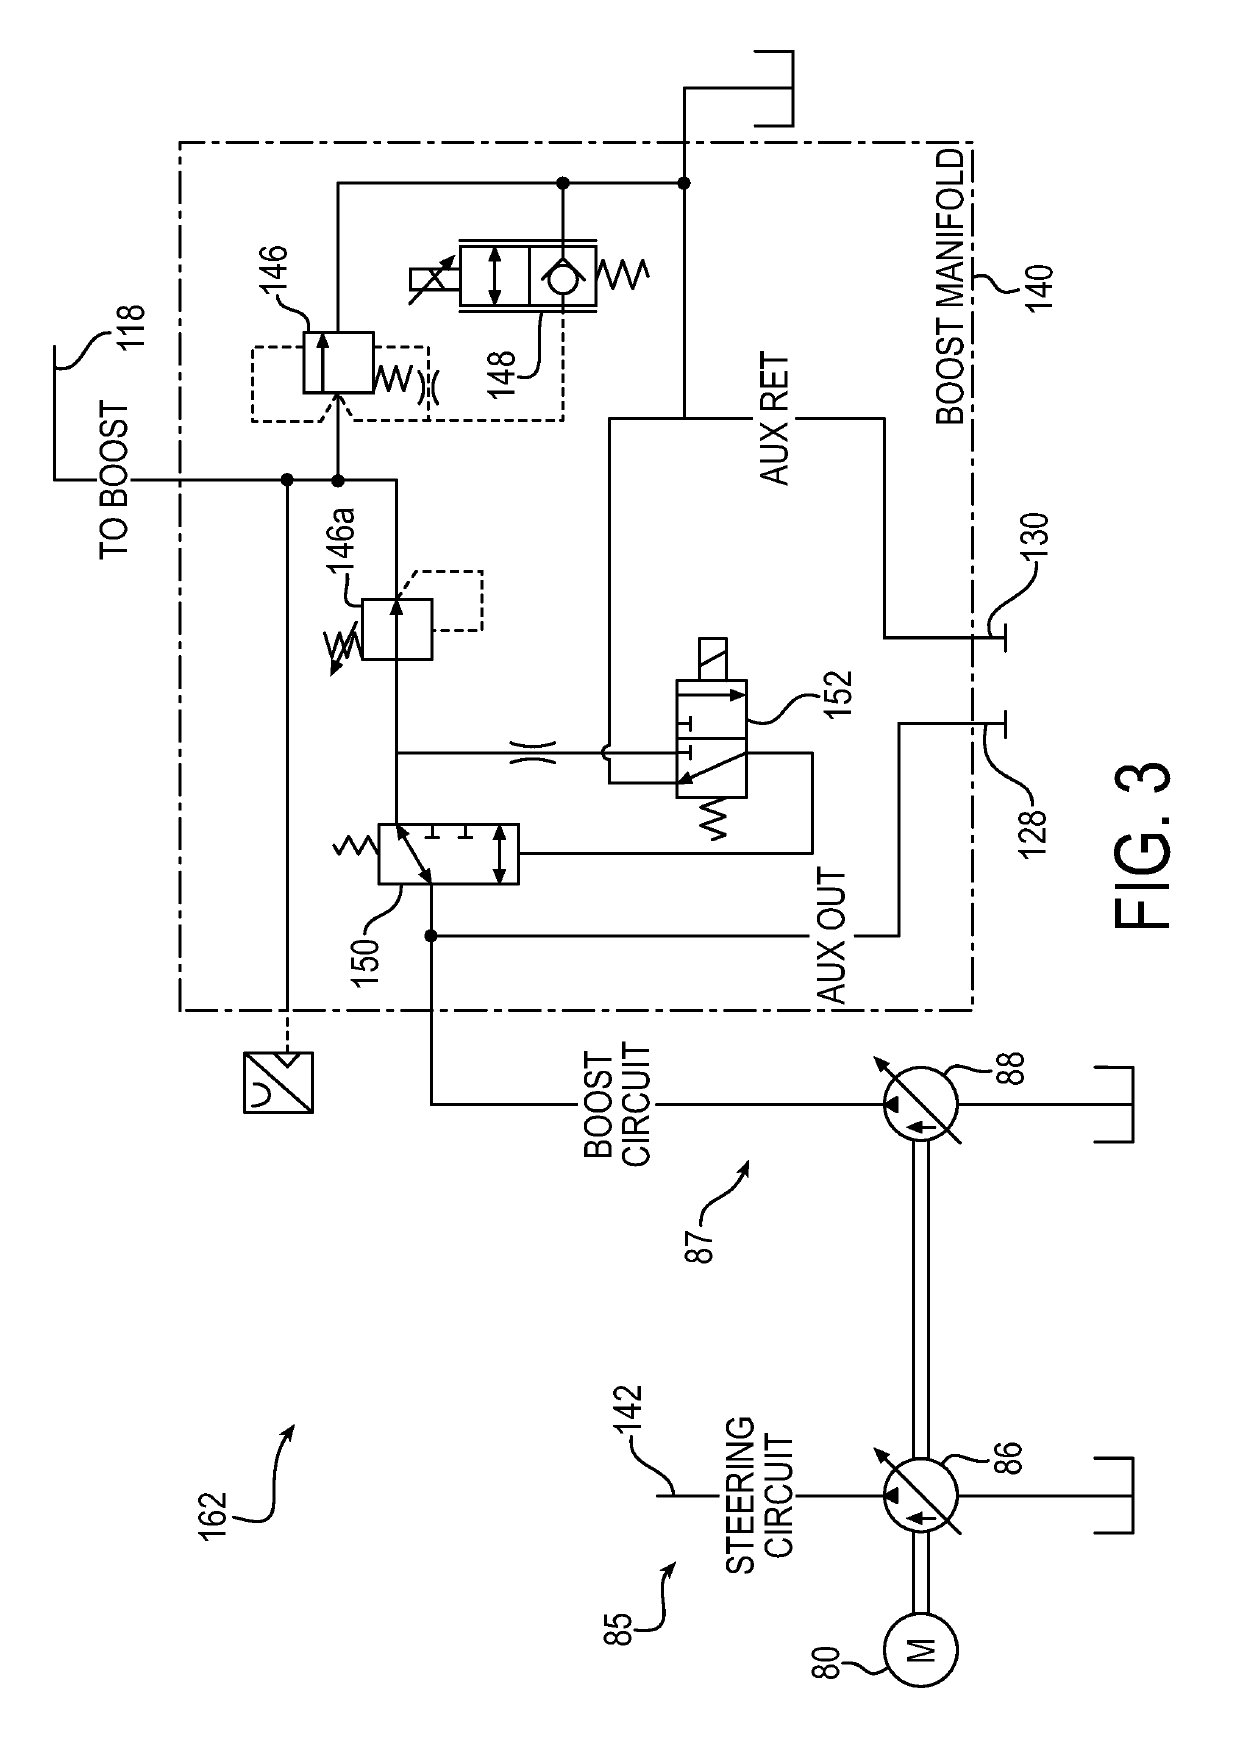 Auxiliary system for vehicle implements